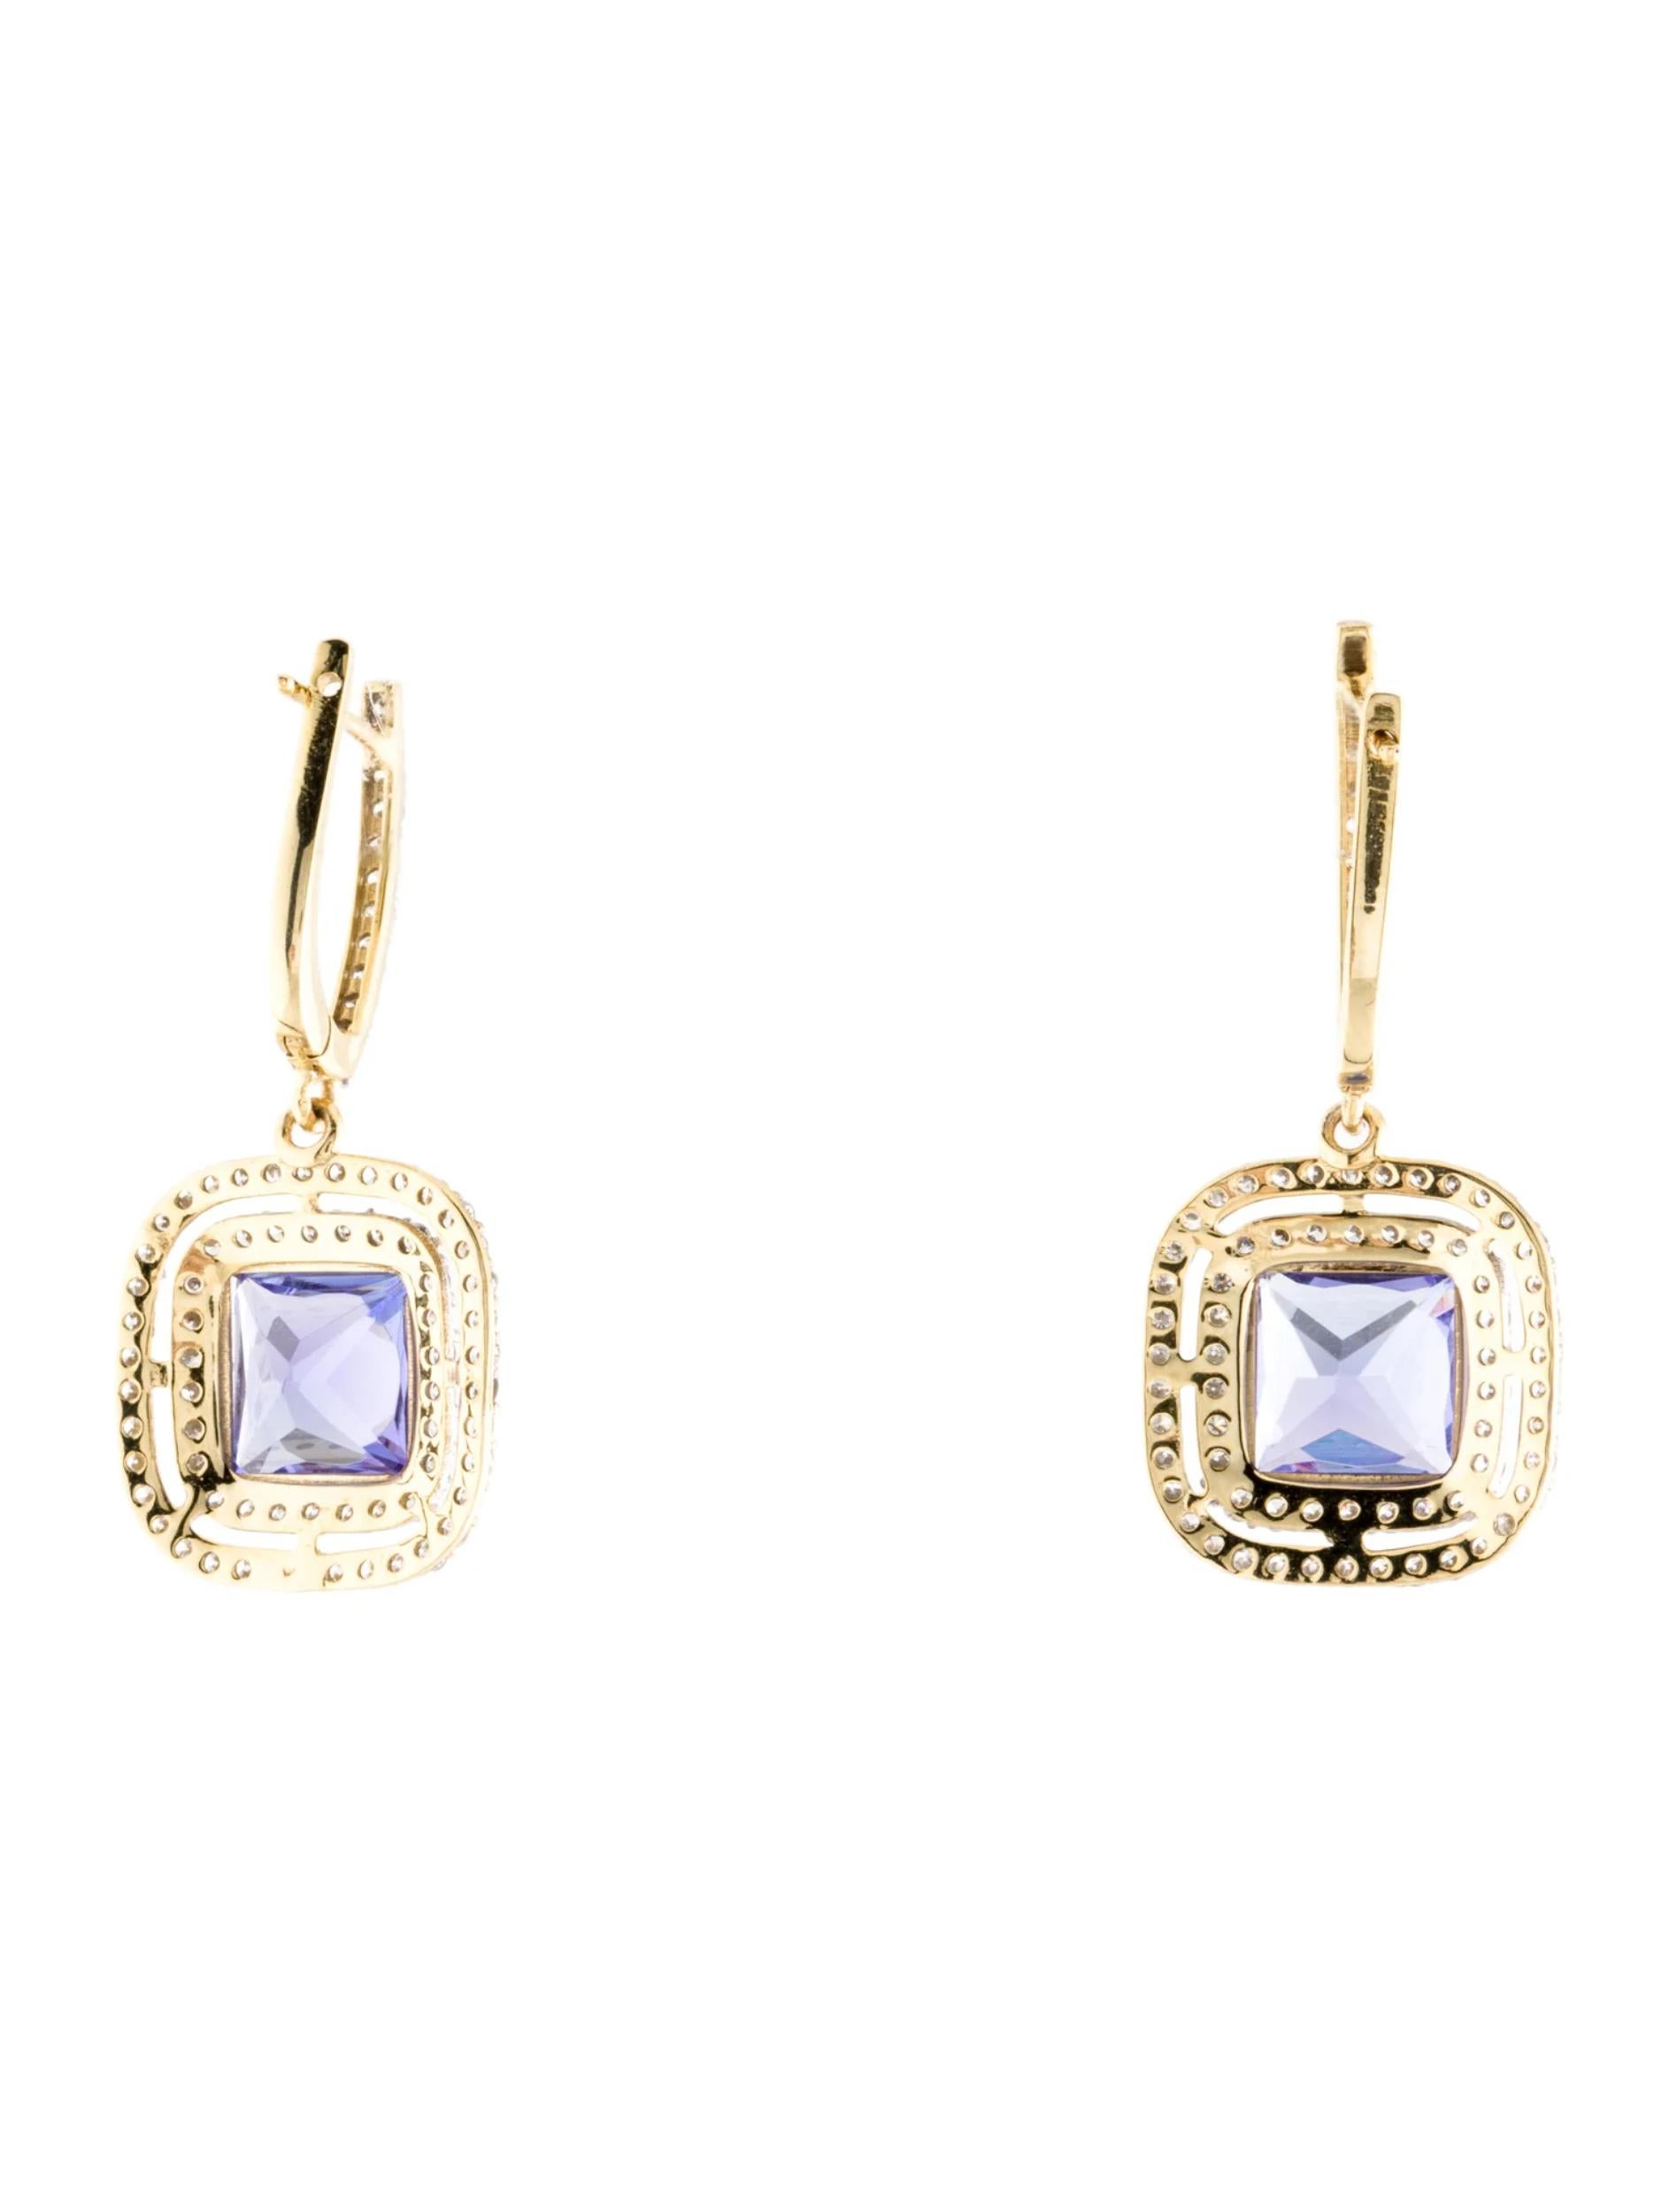 Introducing our exquisite 14K Gold Tanzanite and Diamond Drop Earrings, a luxurious piece of fine jewelry that exudes elegance and style. Crafted with meticulous attention to detail, these high-quality earrings are sure to captivate anyone's